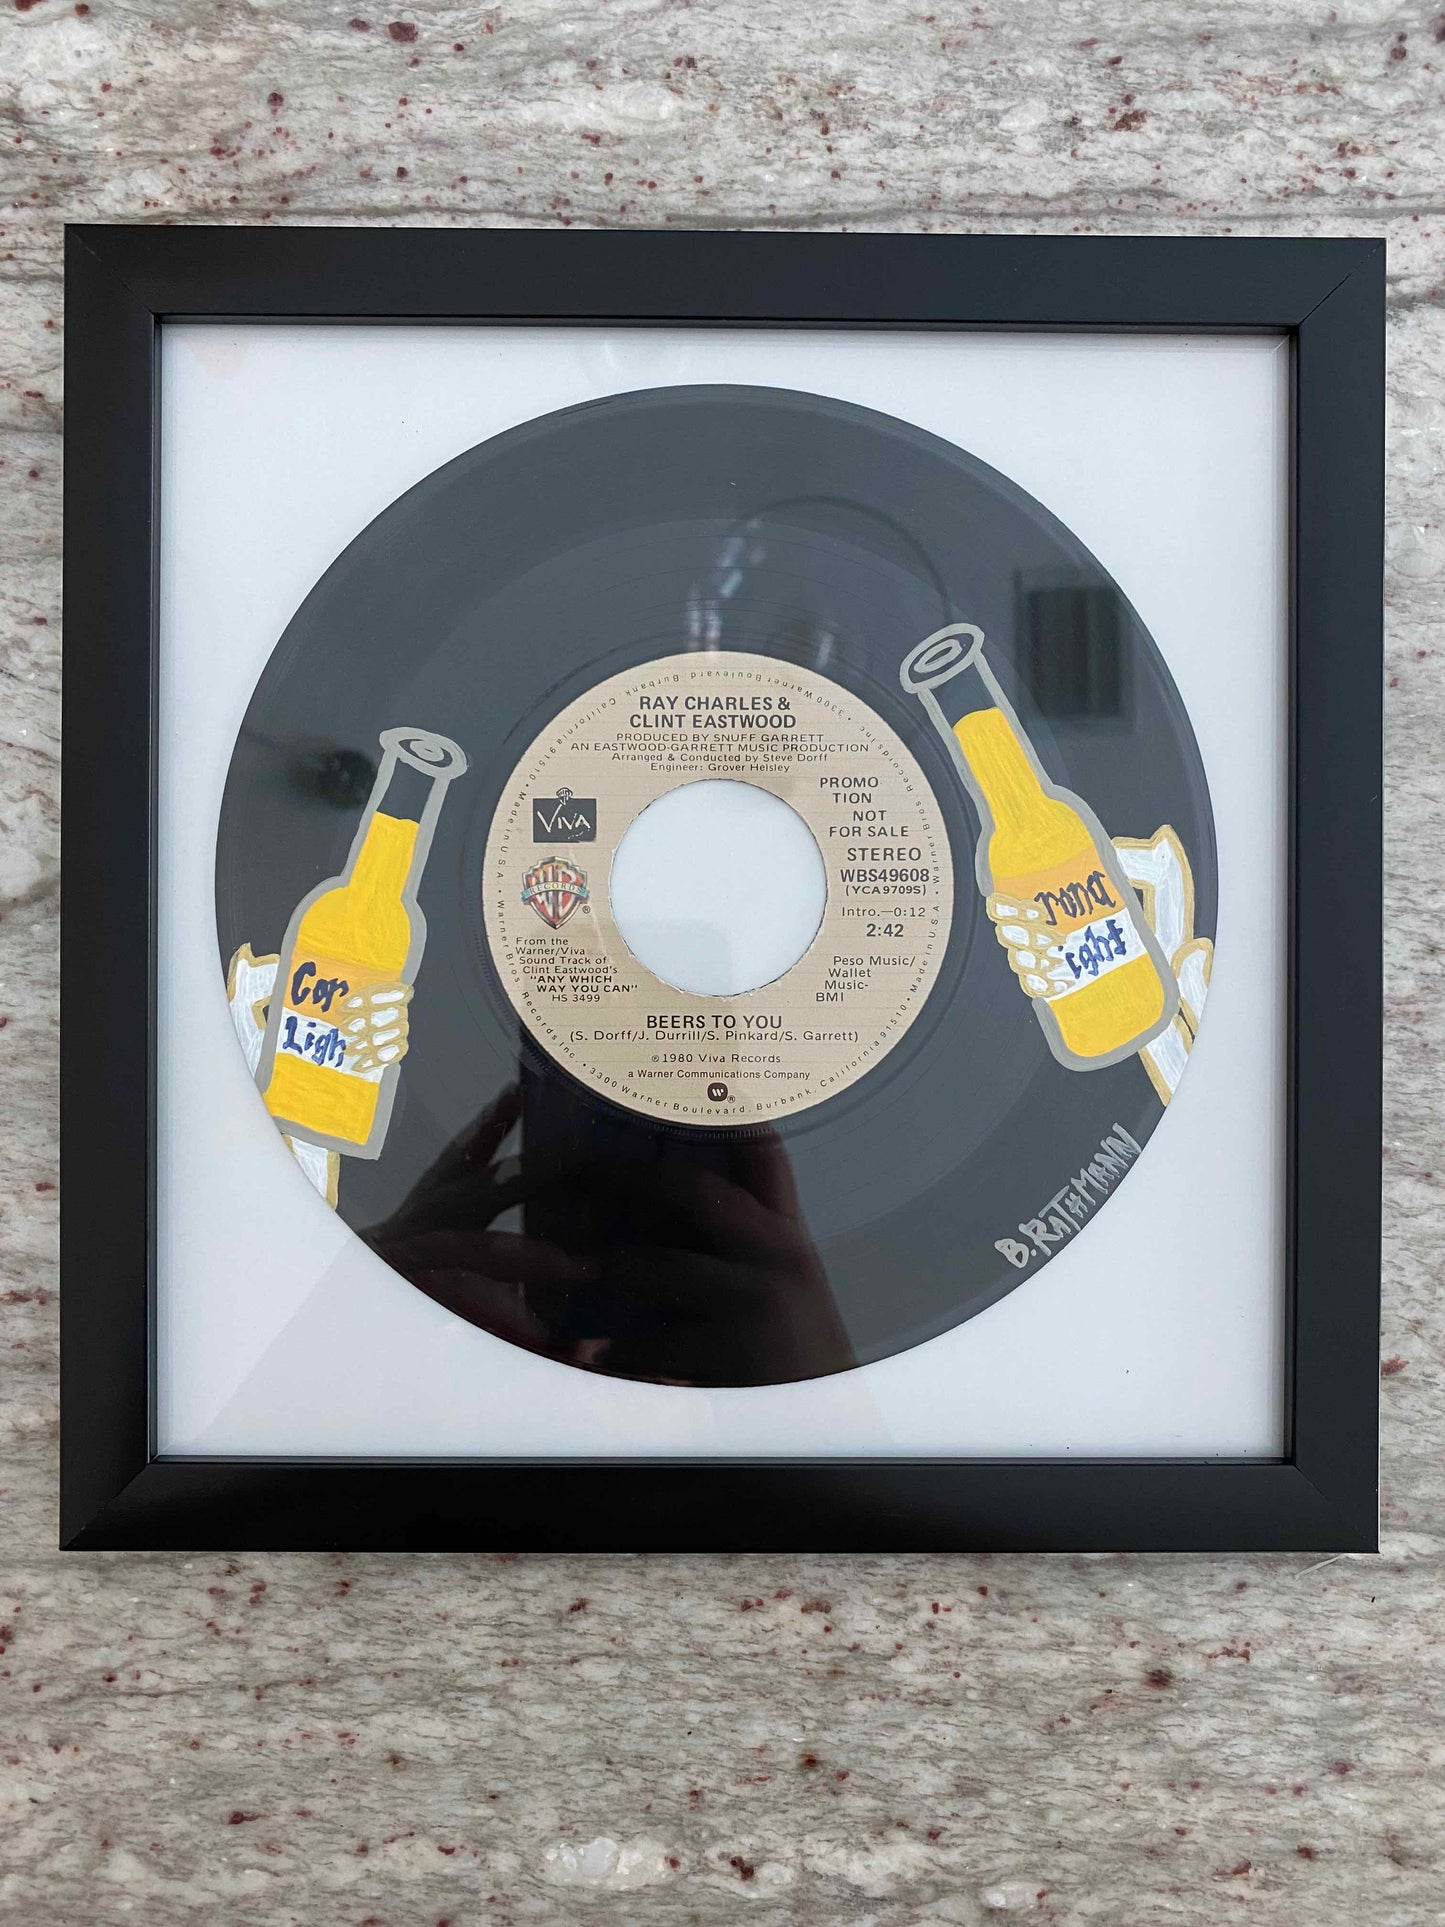 The Beers to You Record is an acrylic painting of two skeletons giving a cheers with Corona Light beer. This is a vinyl record painting that will add a fun and bold aesthetic with your decor. This work was done on a repurposed vinyl record bought at a local thrift store. This was inspired by the music listed on the vinyl album. The frame is included with purchase. Measurements: 8"x8"